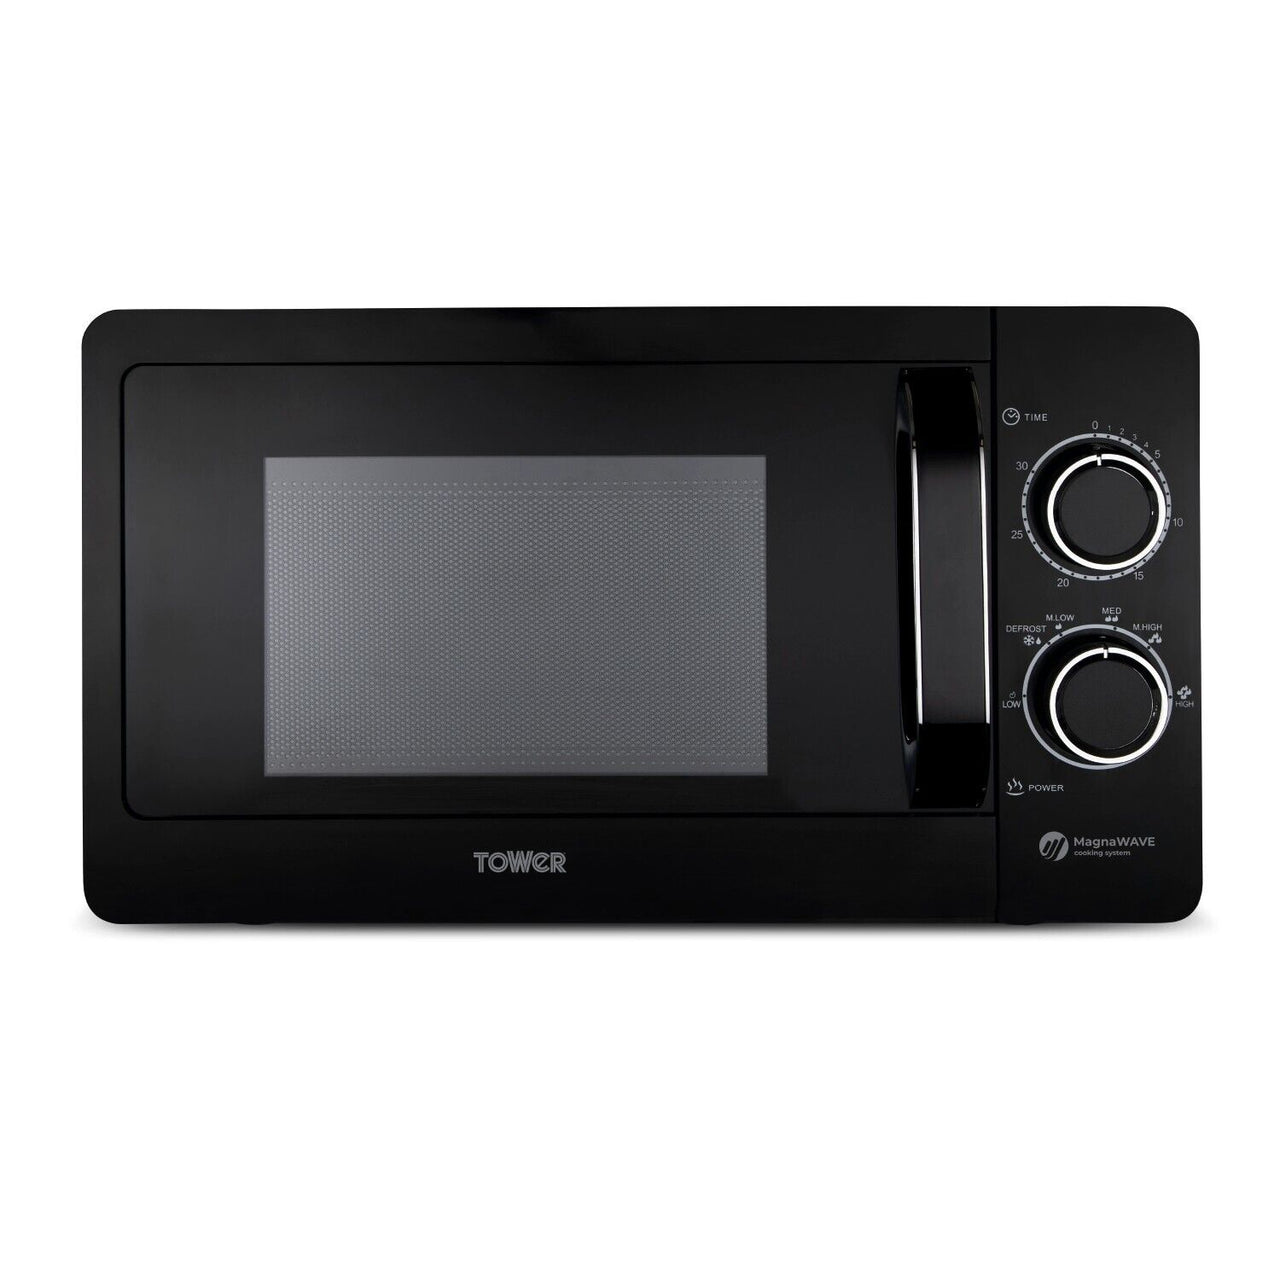 Tower 800W 20L Manual Microwave in Black  T24042BLK - Tower 3 Year Guarantee